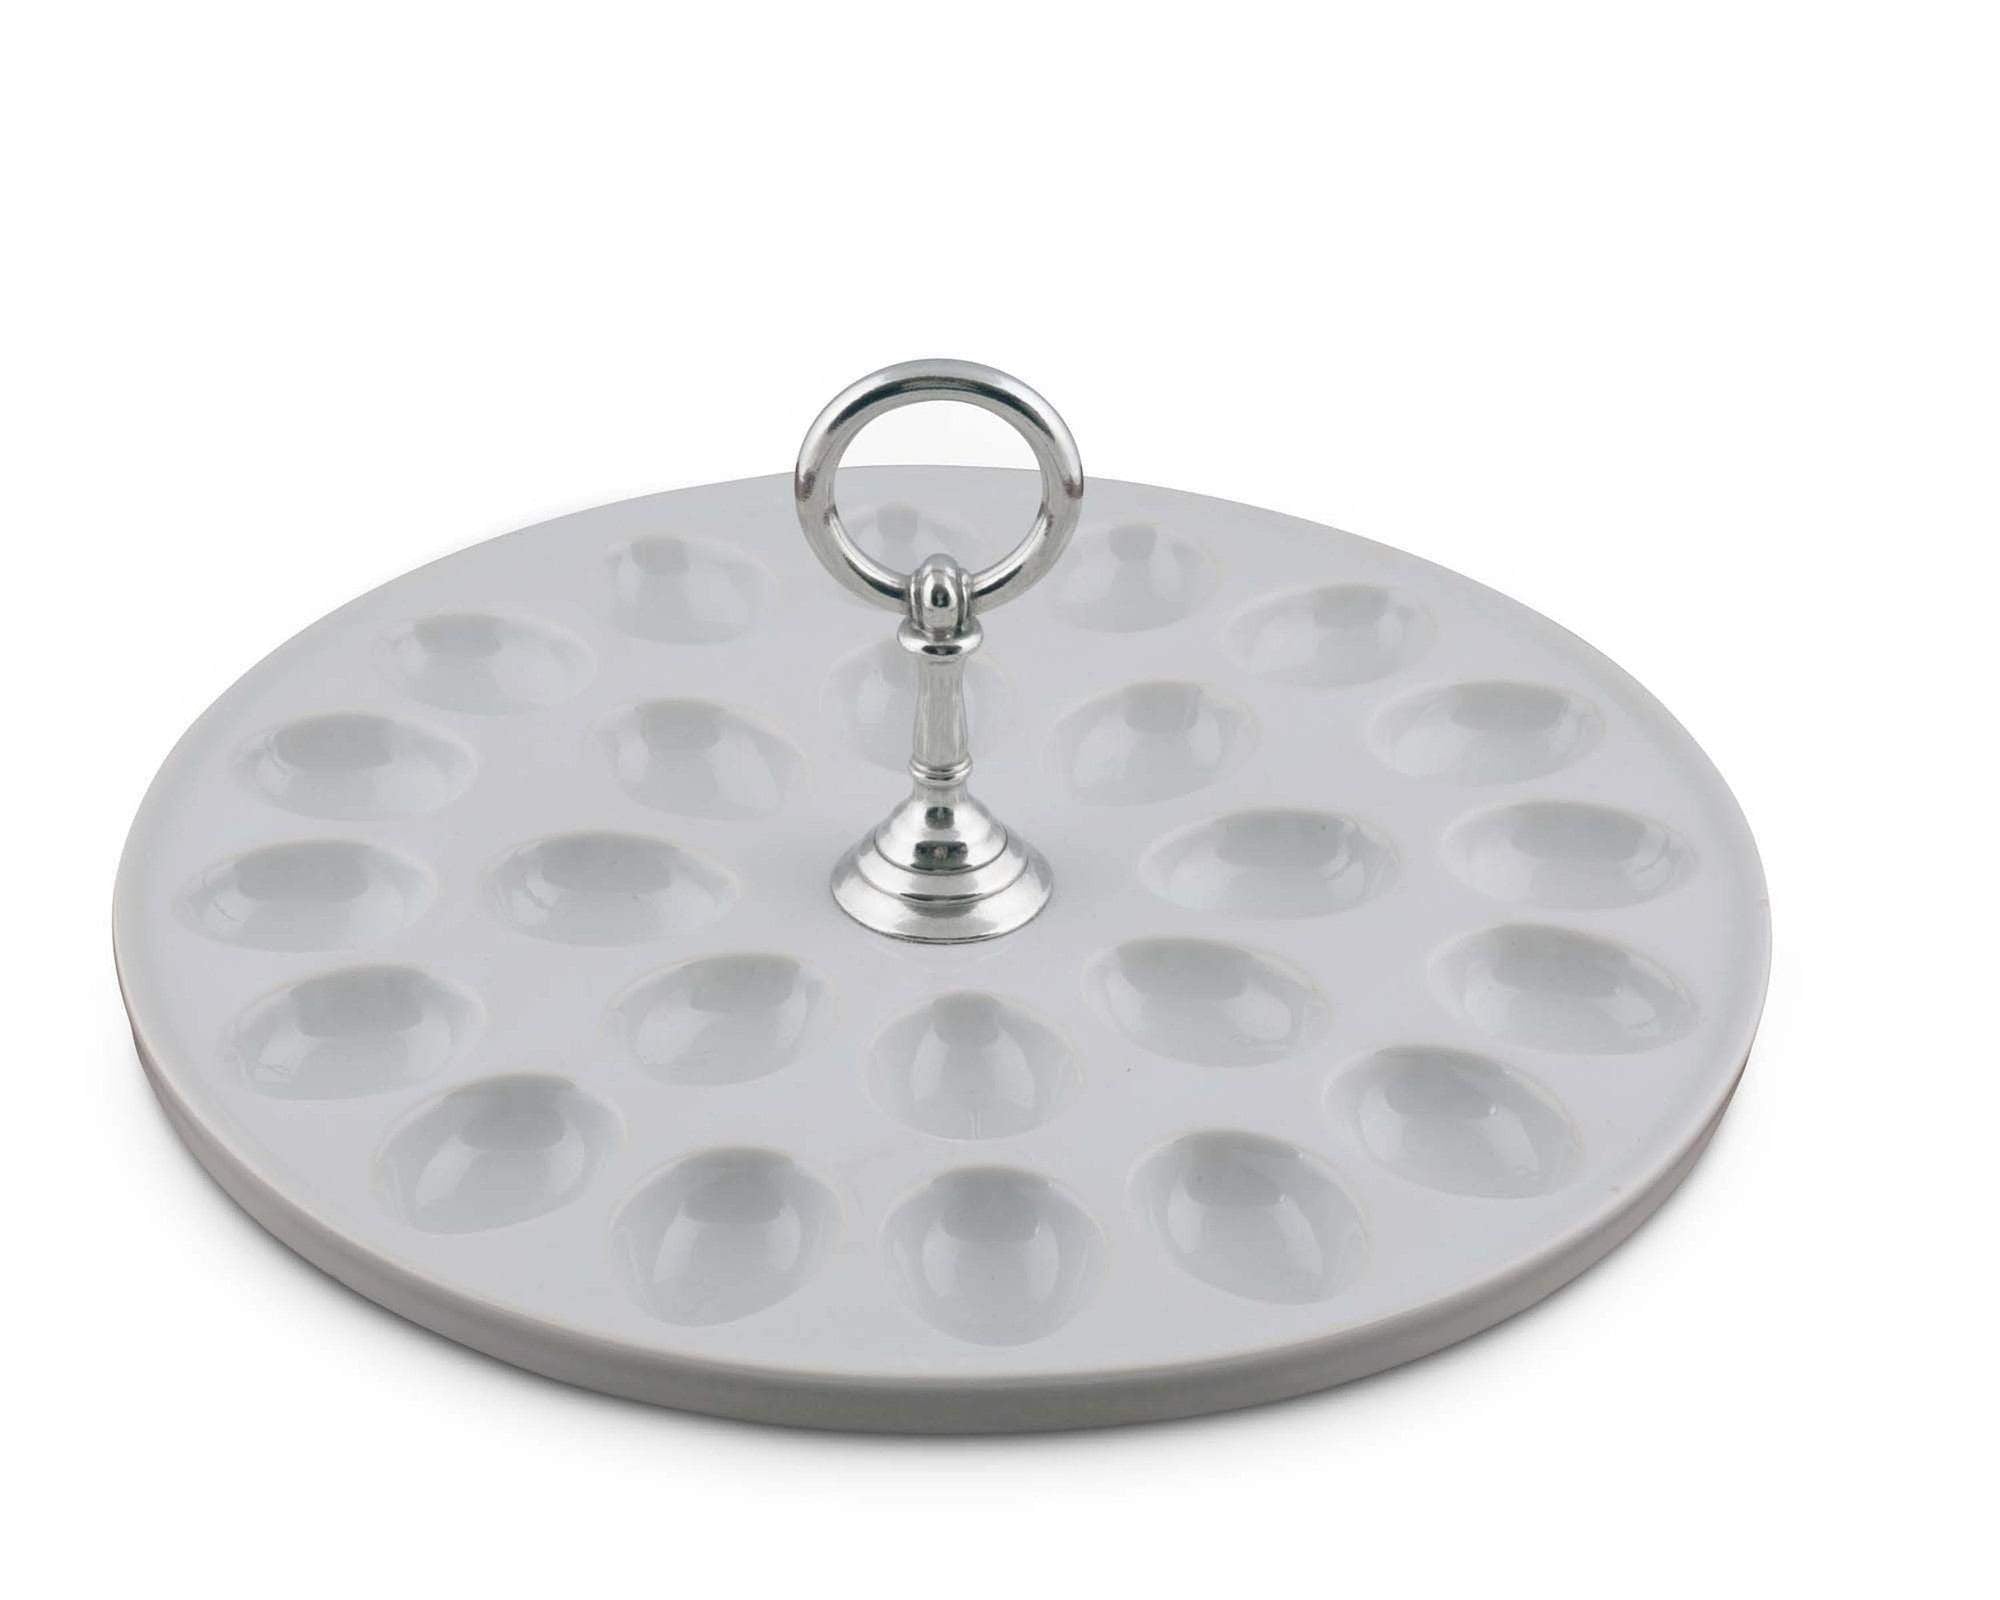 Vagabond House Deviled Egg Tray With Pewter Classic Ring Handle